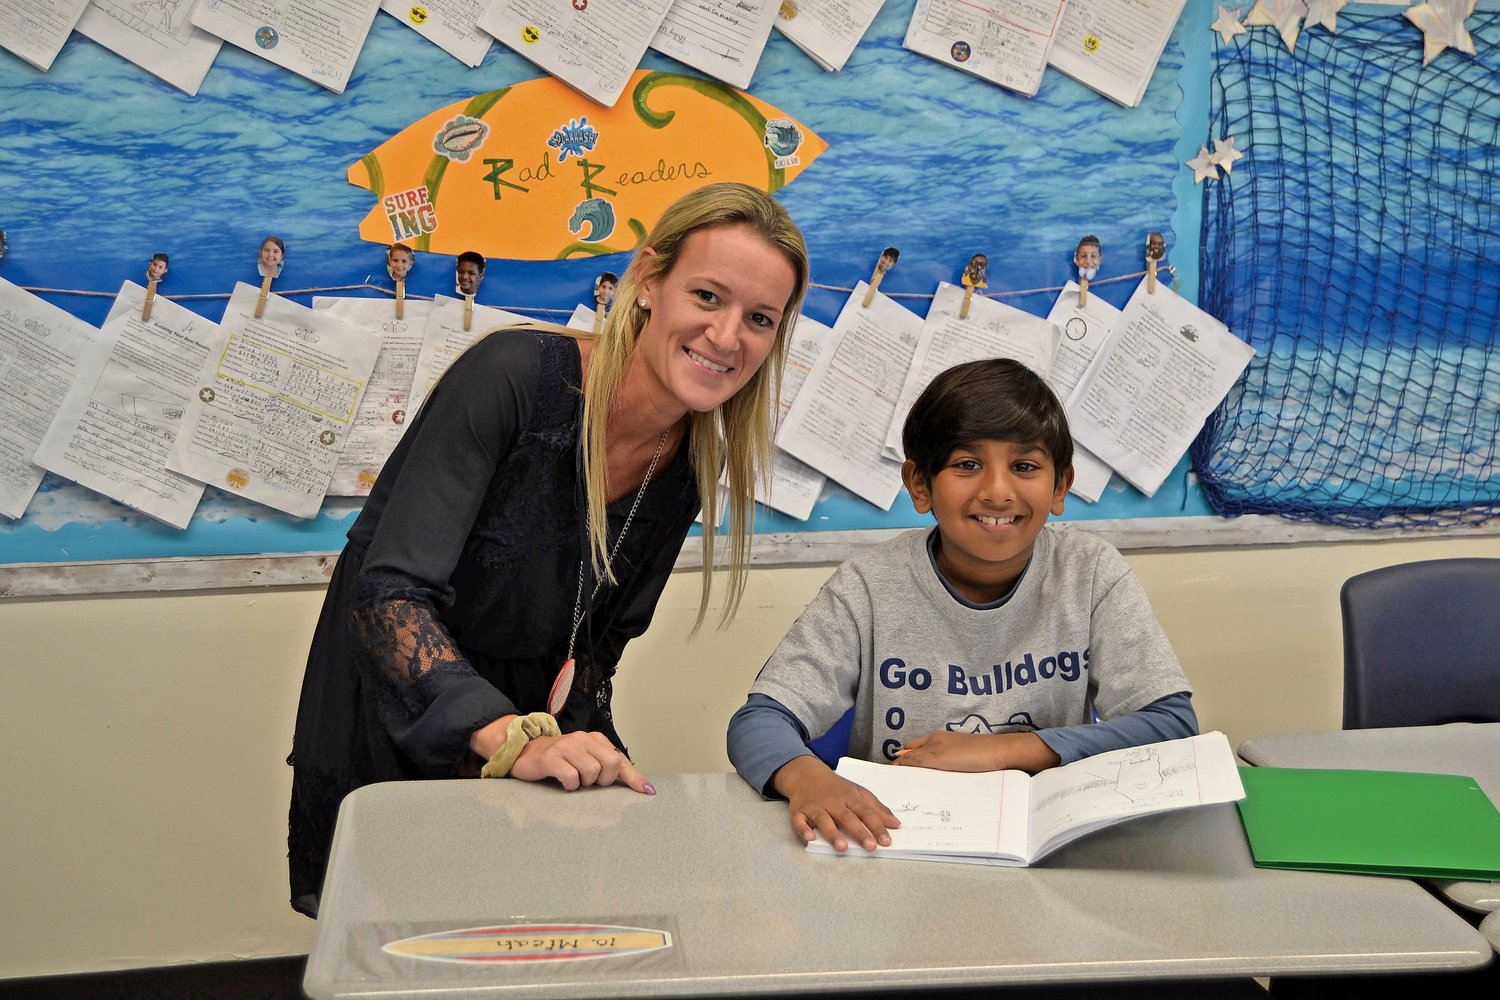 Ogden Elementary School teacher Cortney DelGrosso with student Micah Koshi who are part of the sixth best school district in New York based on the latest Niche rankings.